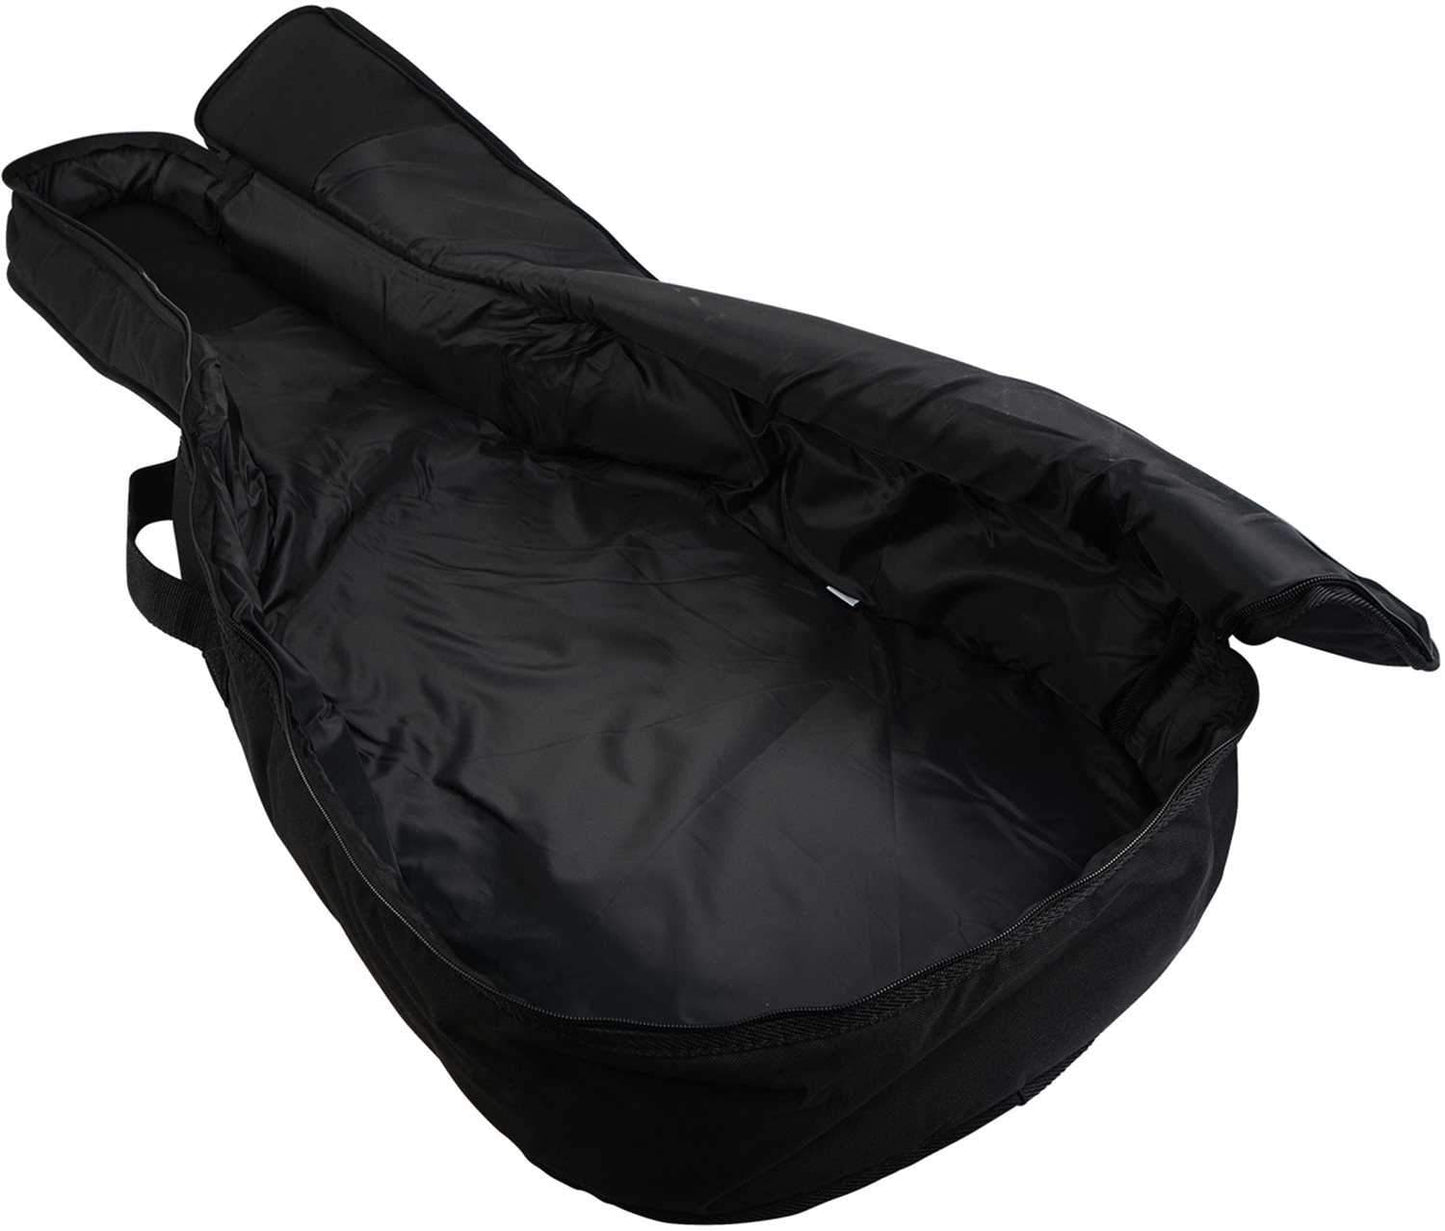 Gator GC-DREAD Dreadnought Guitar Case - ProSound and Stage Lighting